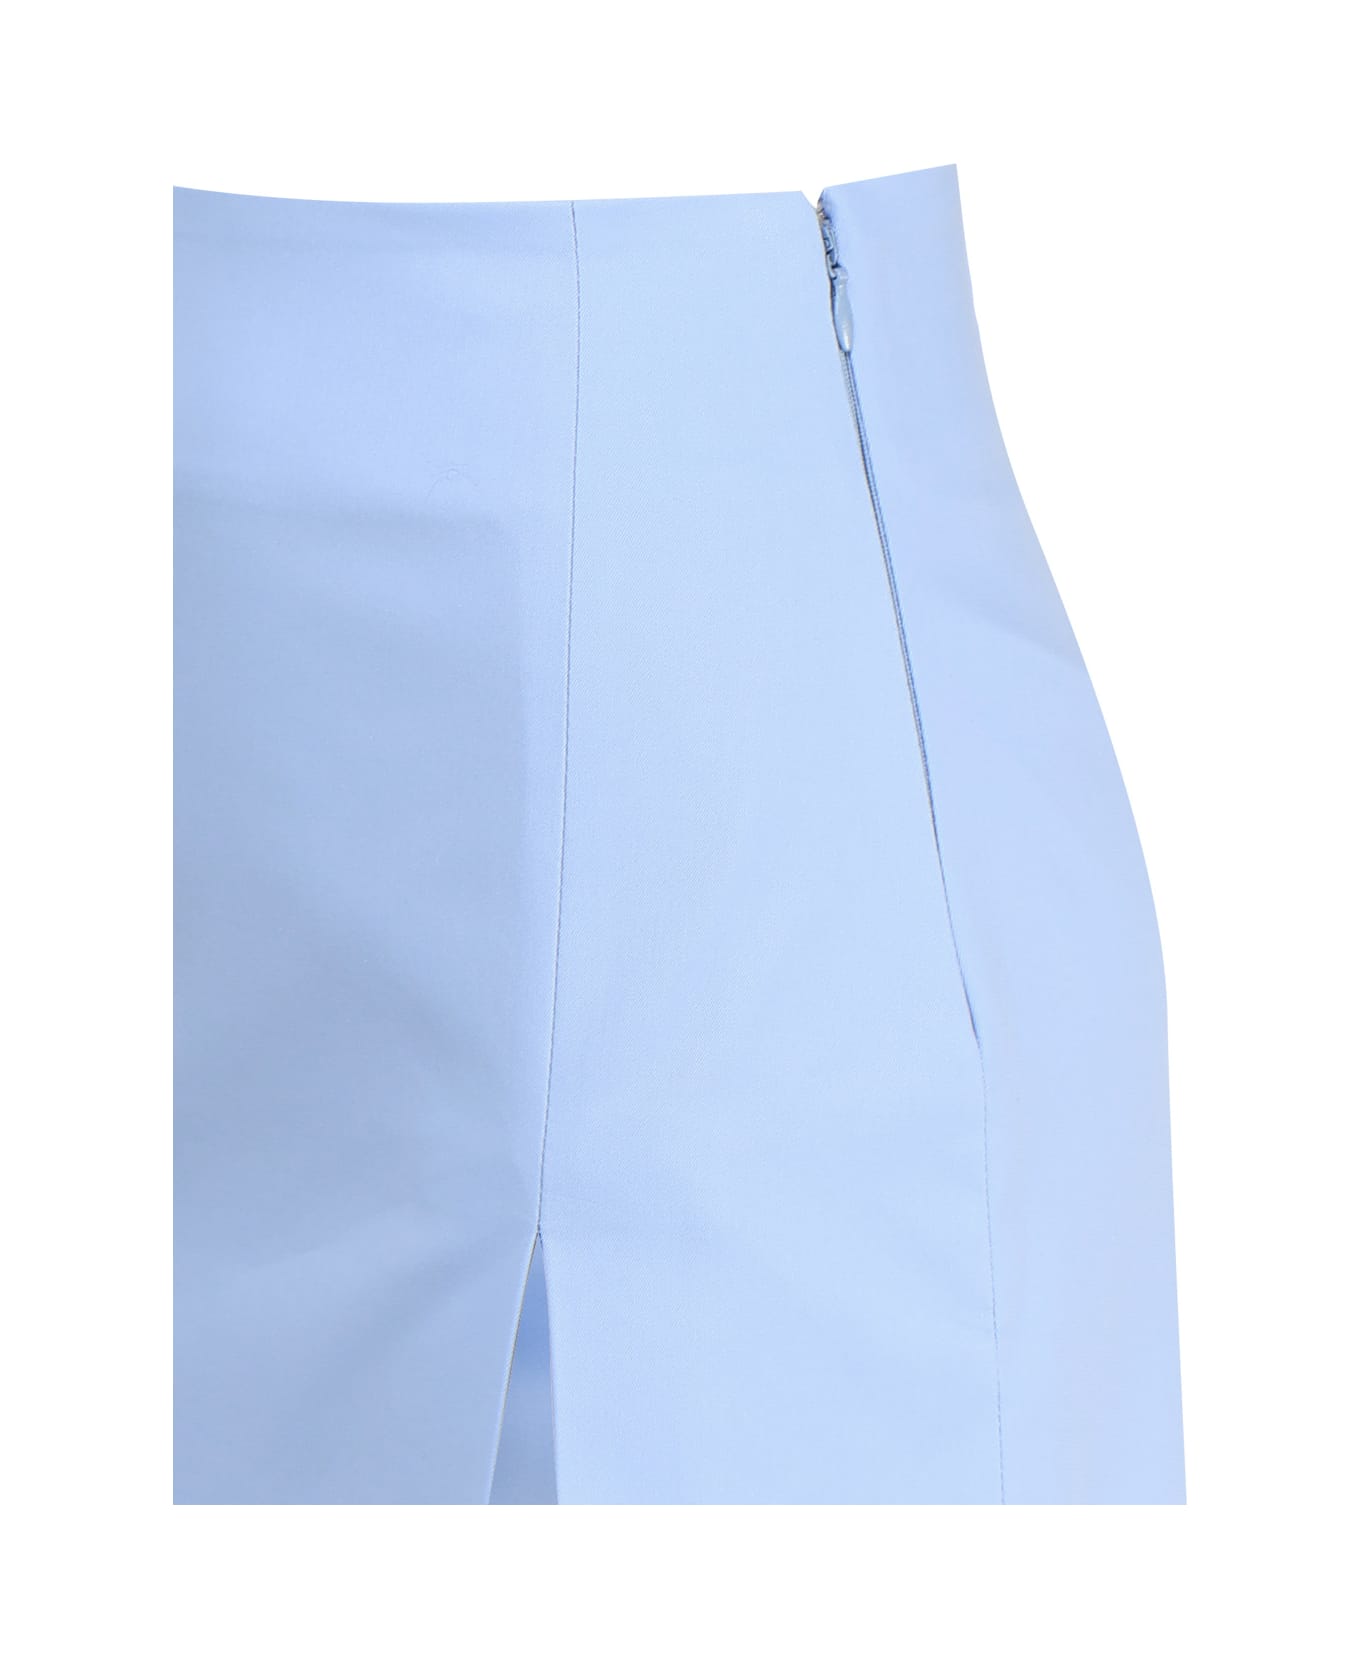 The Andamane Gioia Miniskirt With Side Slit - Blue